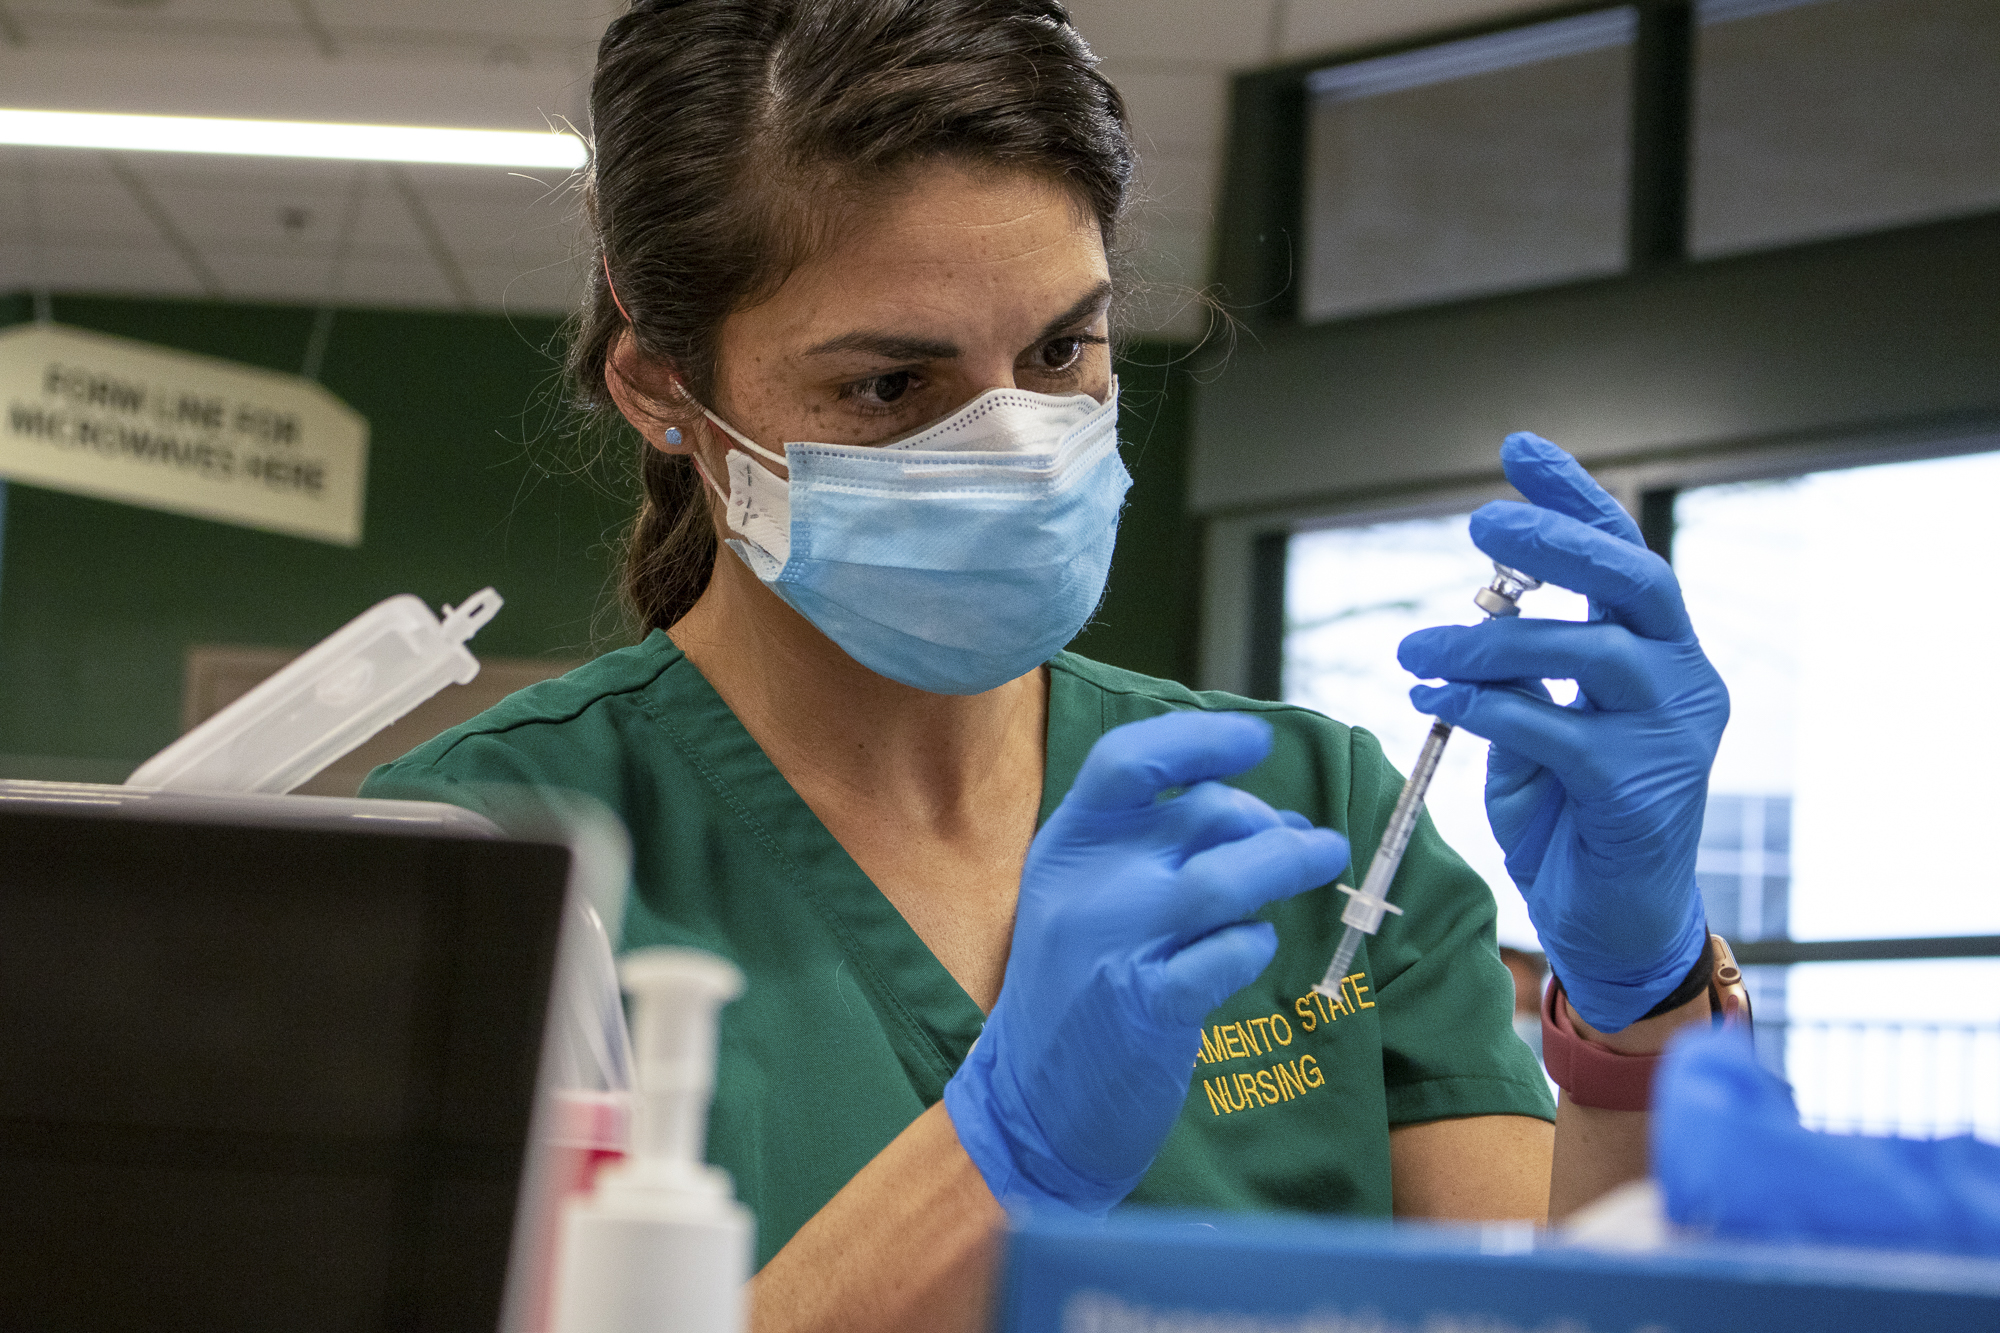 Sacramento State nursing student Amanda Clark fills a syringe with the COVID vaccine at Sacramento State's University Union building on Jan. 29, 2021. Sac State nursing students participate in administering vaccinations to faculty and nursing students. Photo by Rahul Lal for CalMatters  